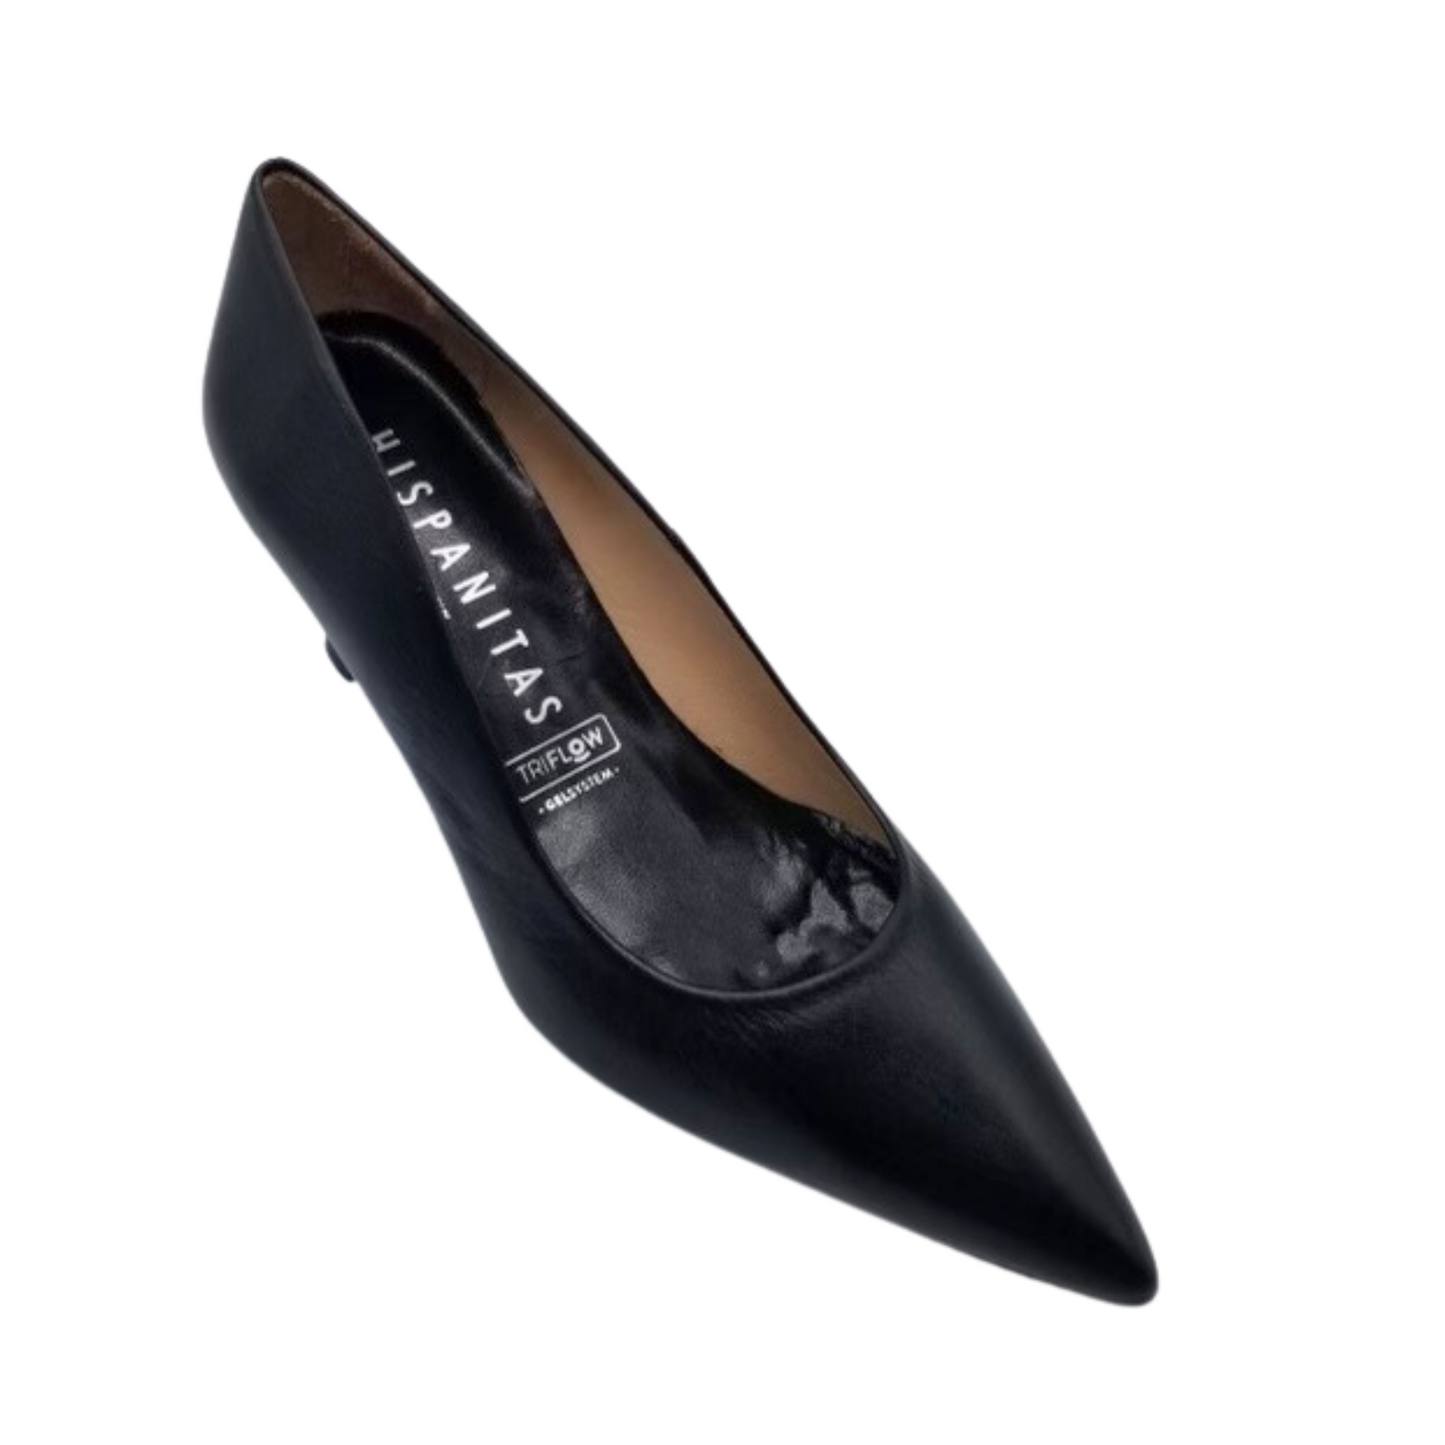 Angled side view of a classic pump with a pointy toe.  Shown in black but also available in a creamy white.